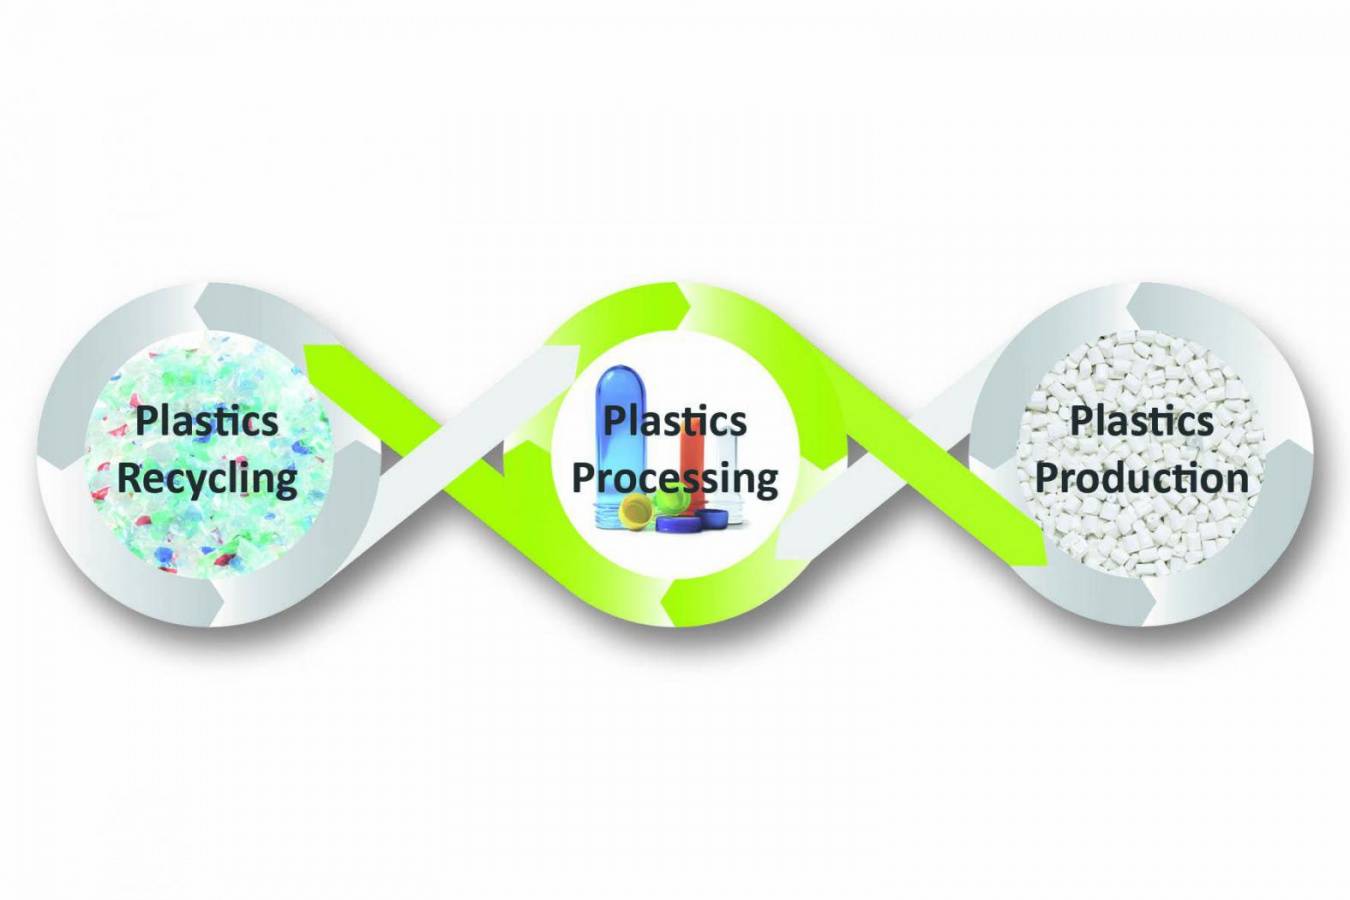 Sesotec is focusing on the circular economy at its K 2019 stand. Recycling turns used plastic products into recyclates. Just like virgin material, those recyclates are then processed into new plastic products that can be recycled again after use.